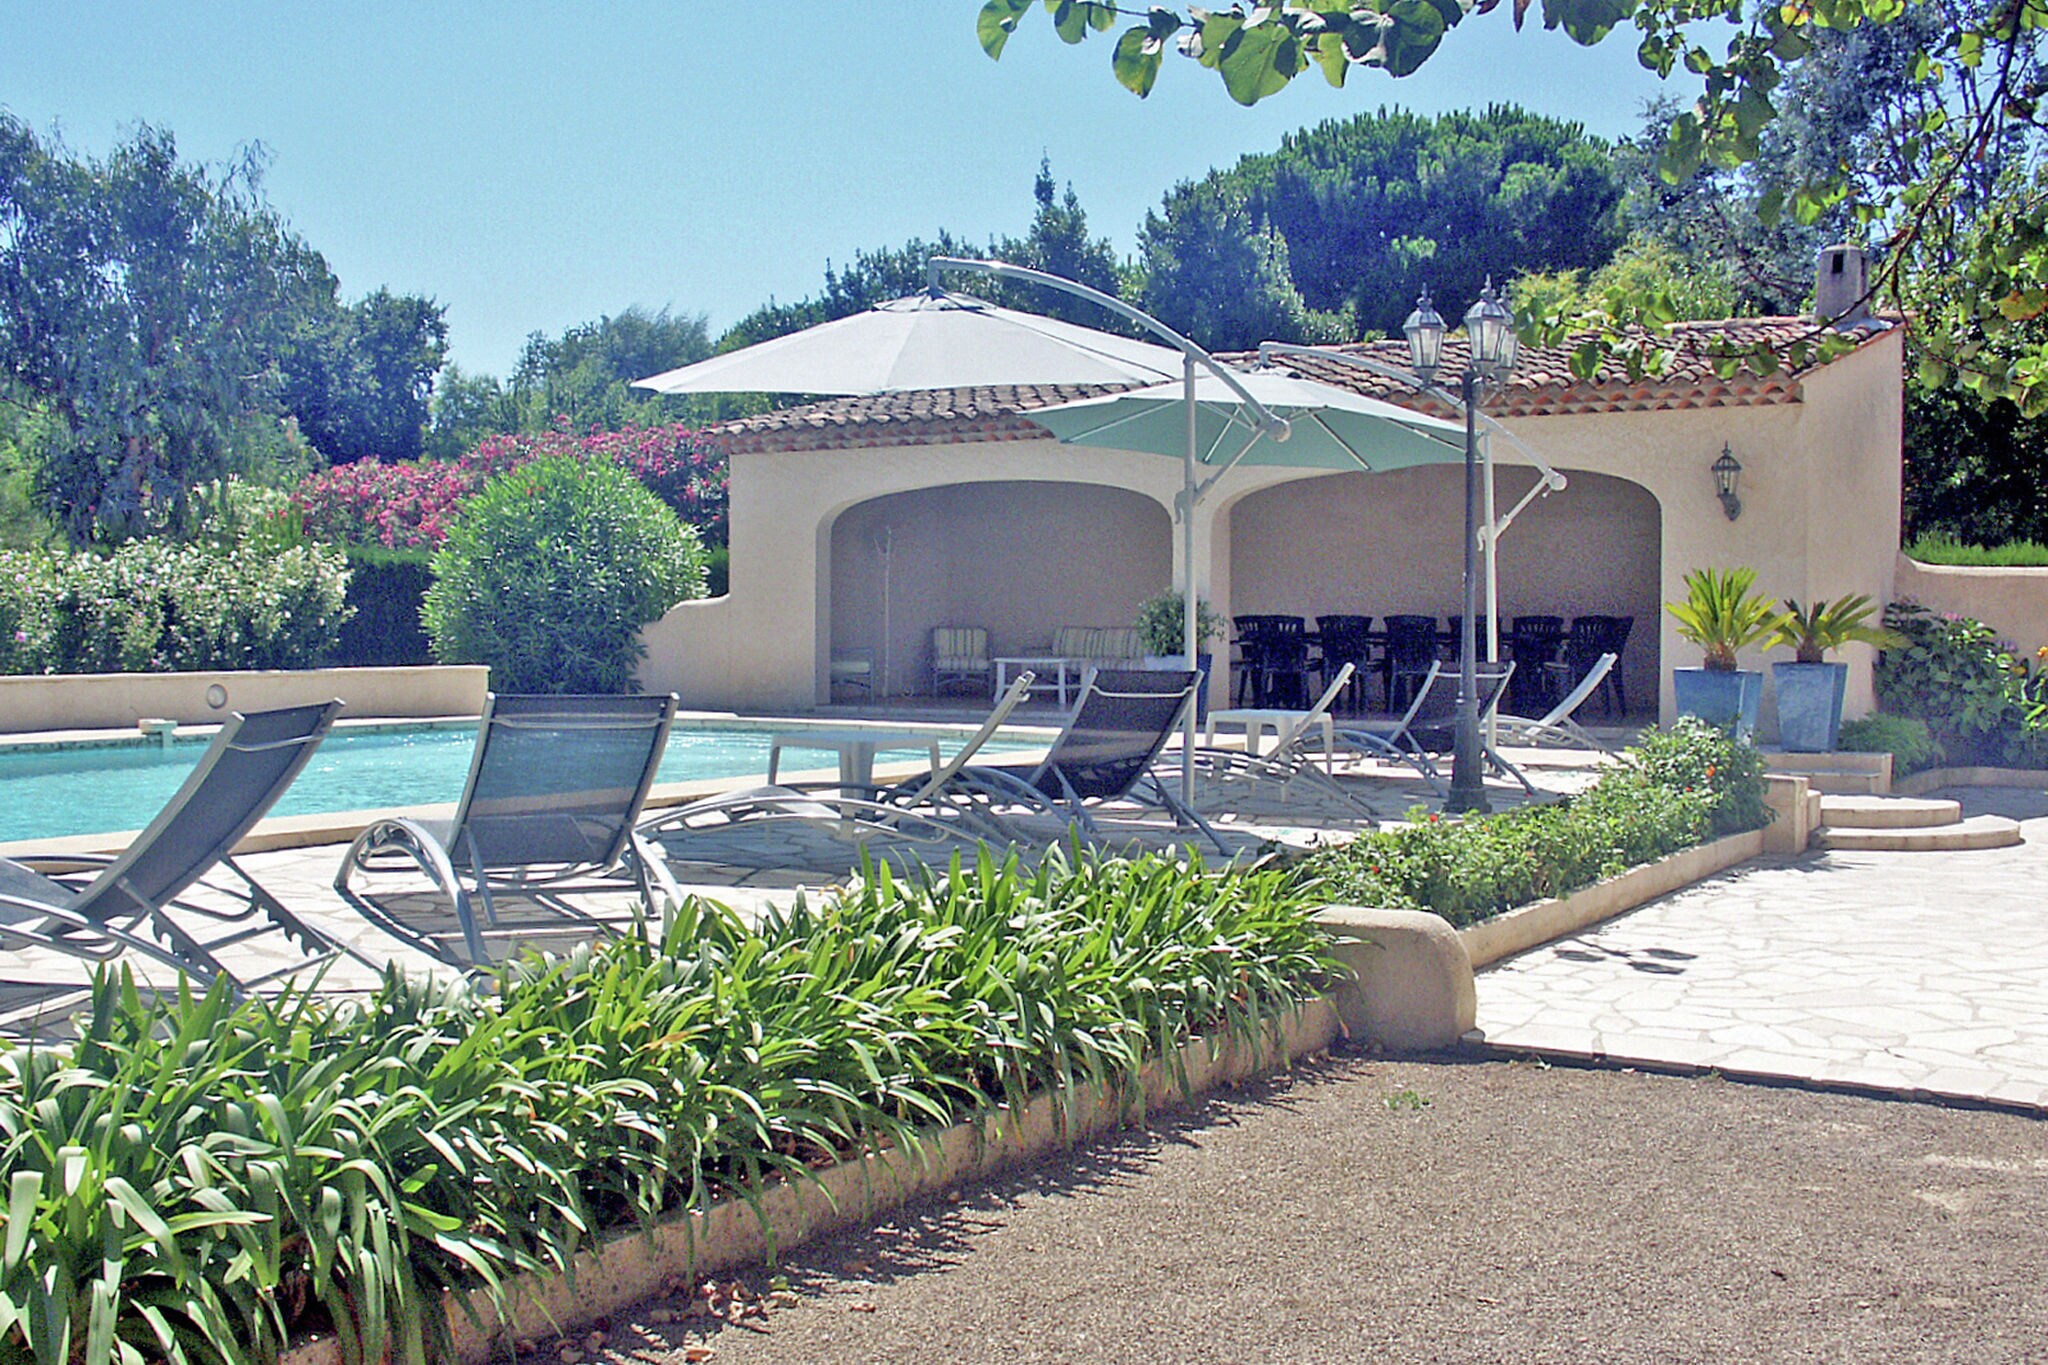 Sprawling Villa in Saint-Tropez with Swimming Pool